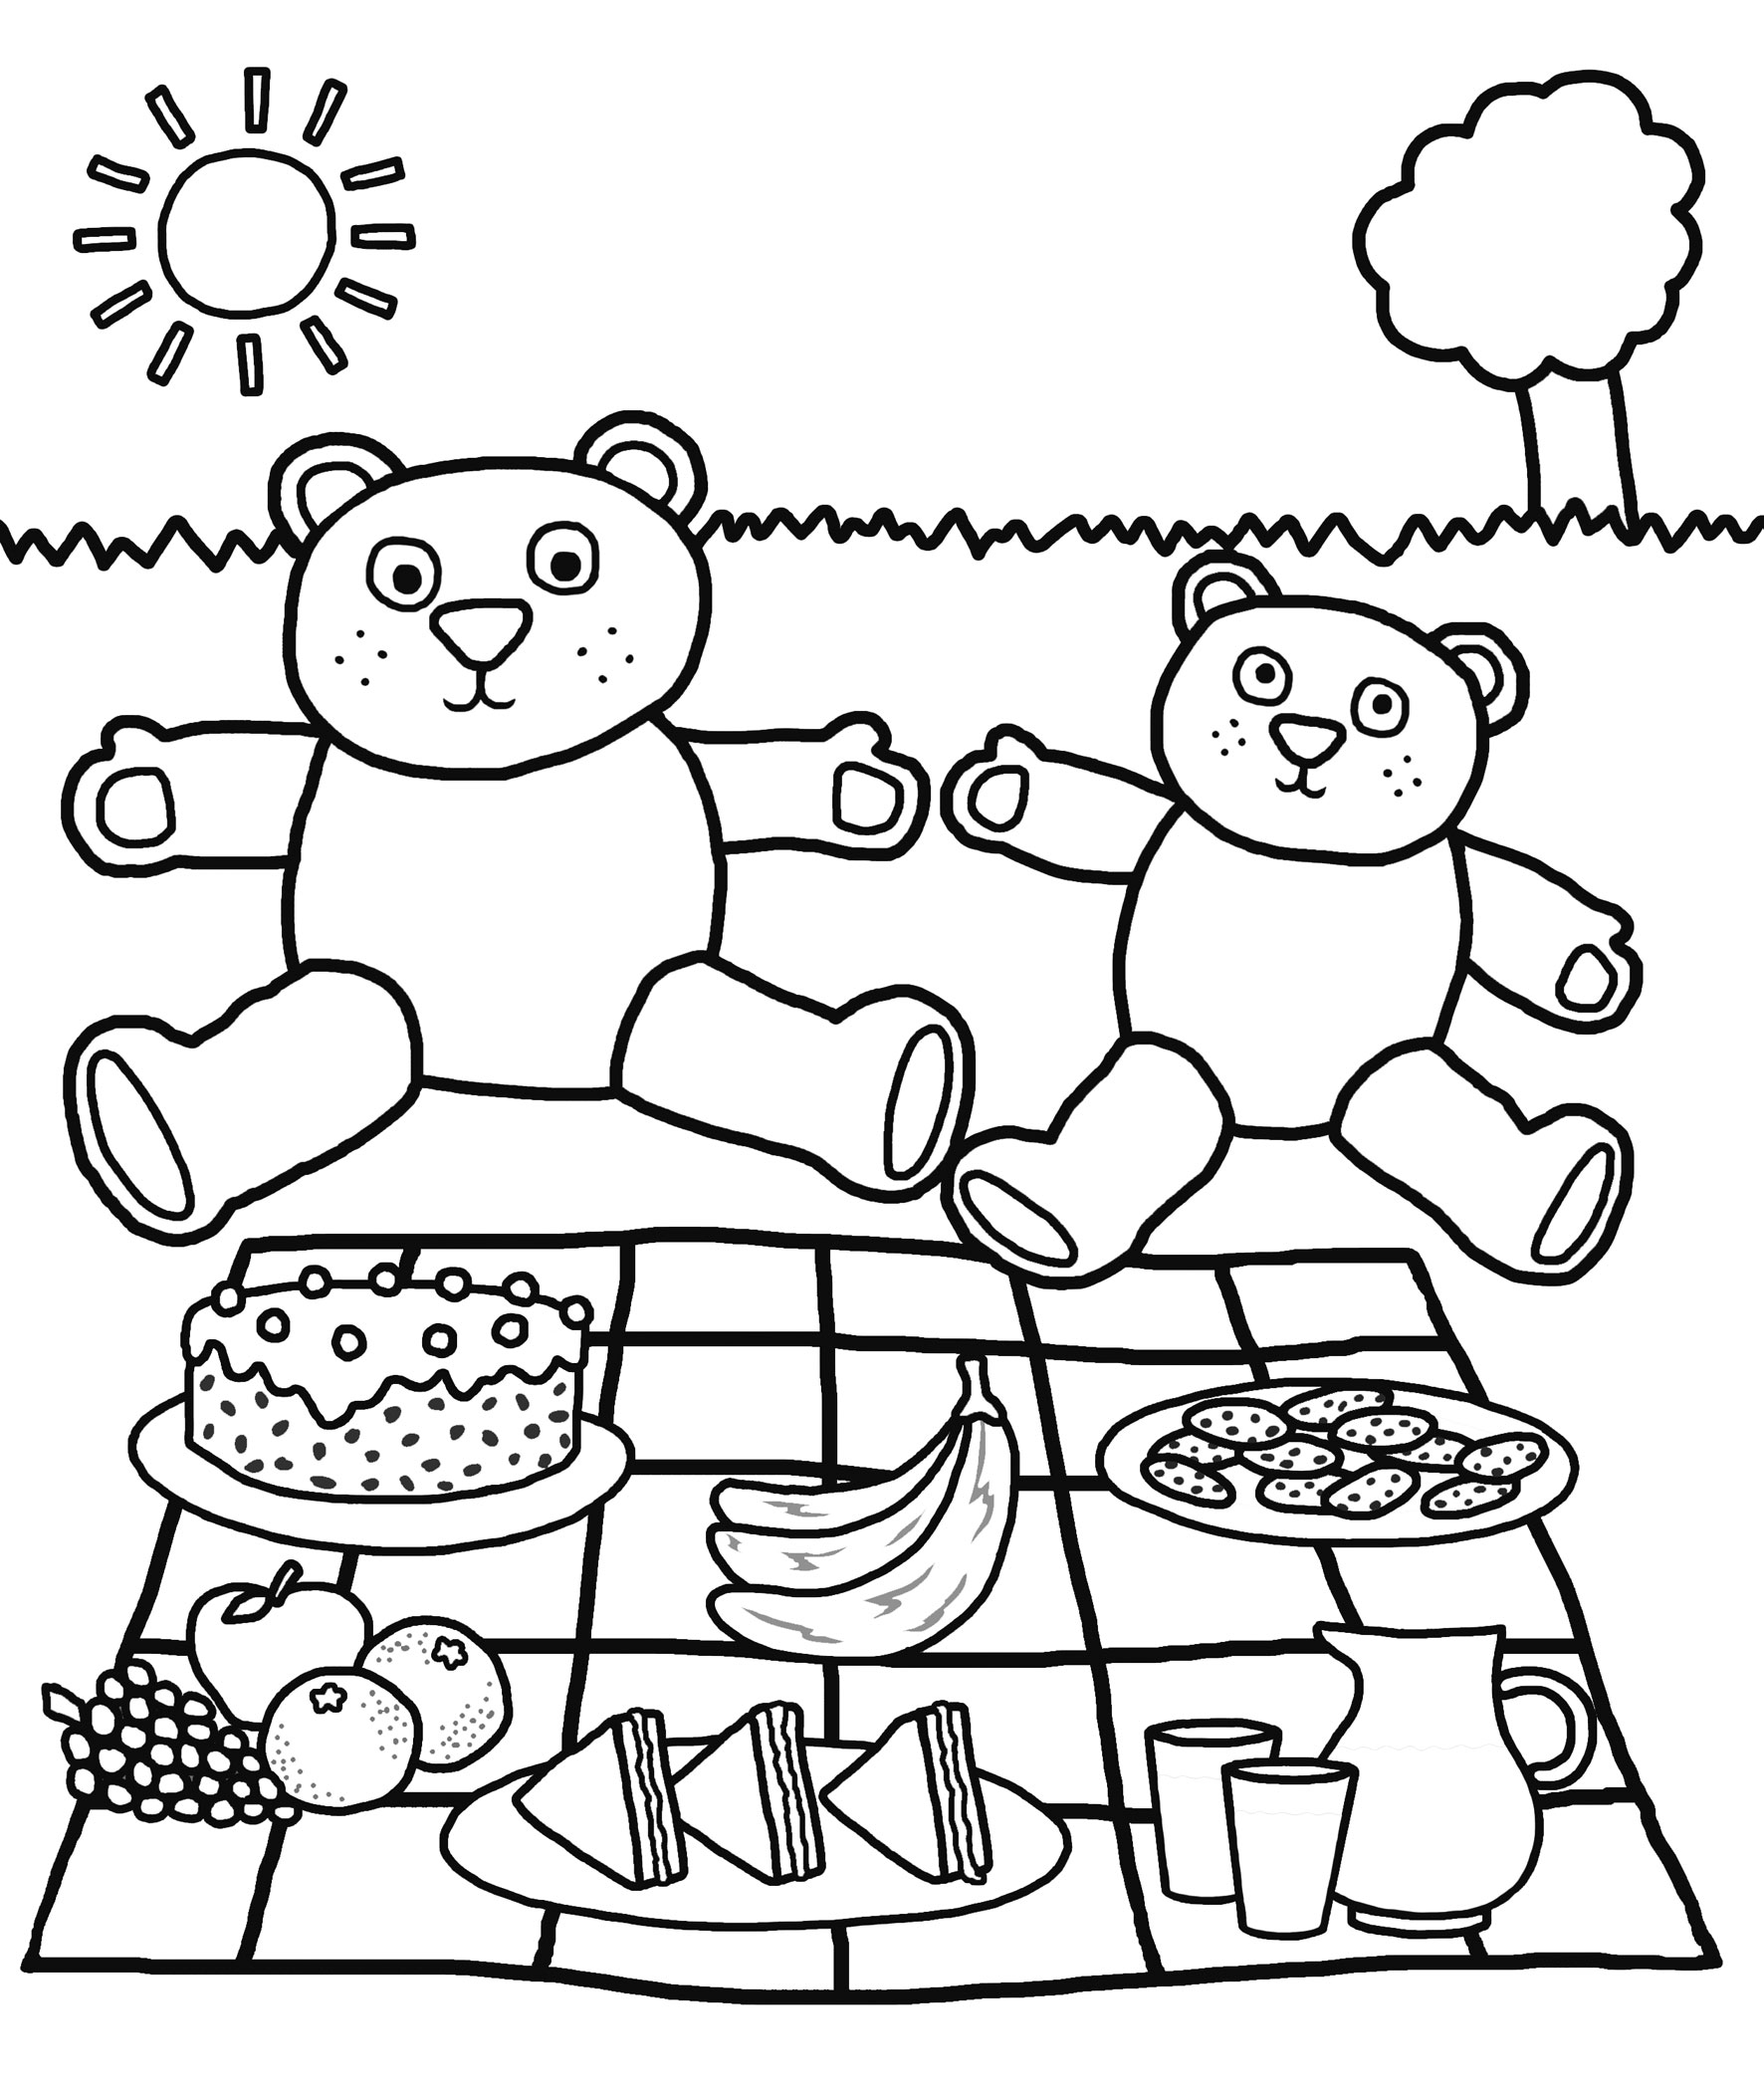 Grizzly Family In Spring coloring #3, Download drawings